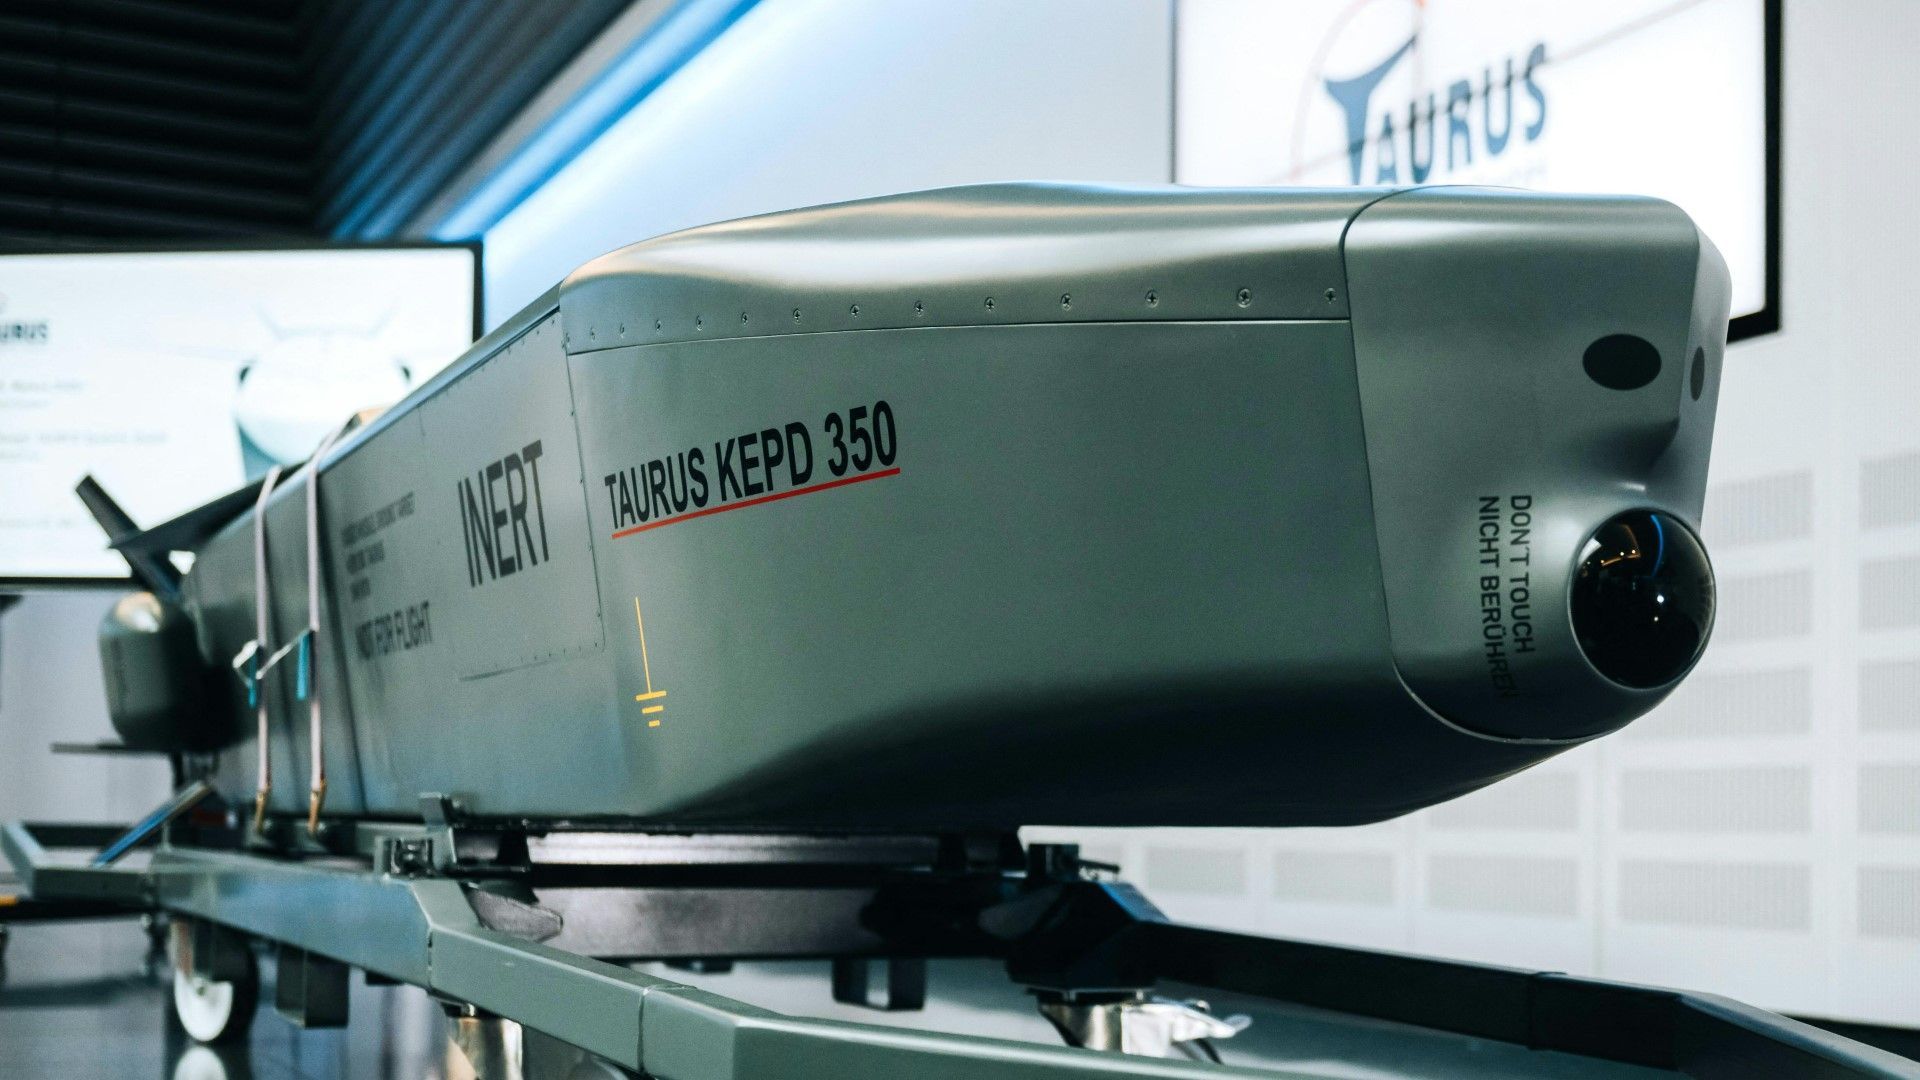 Briefly explained: The Taurus cruise missile